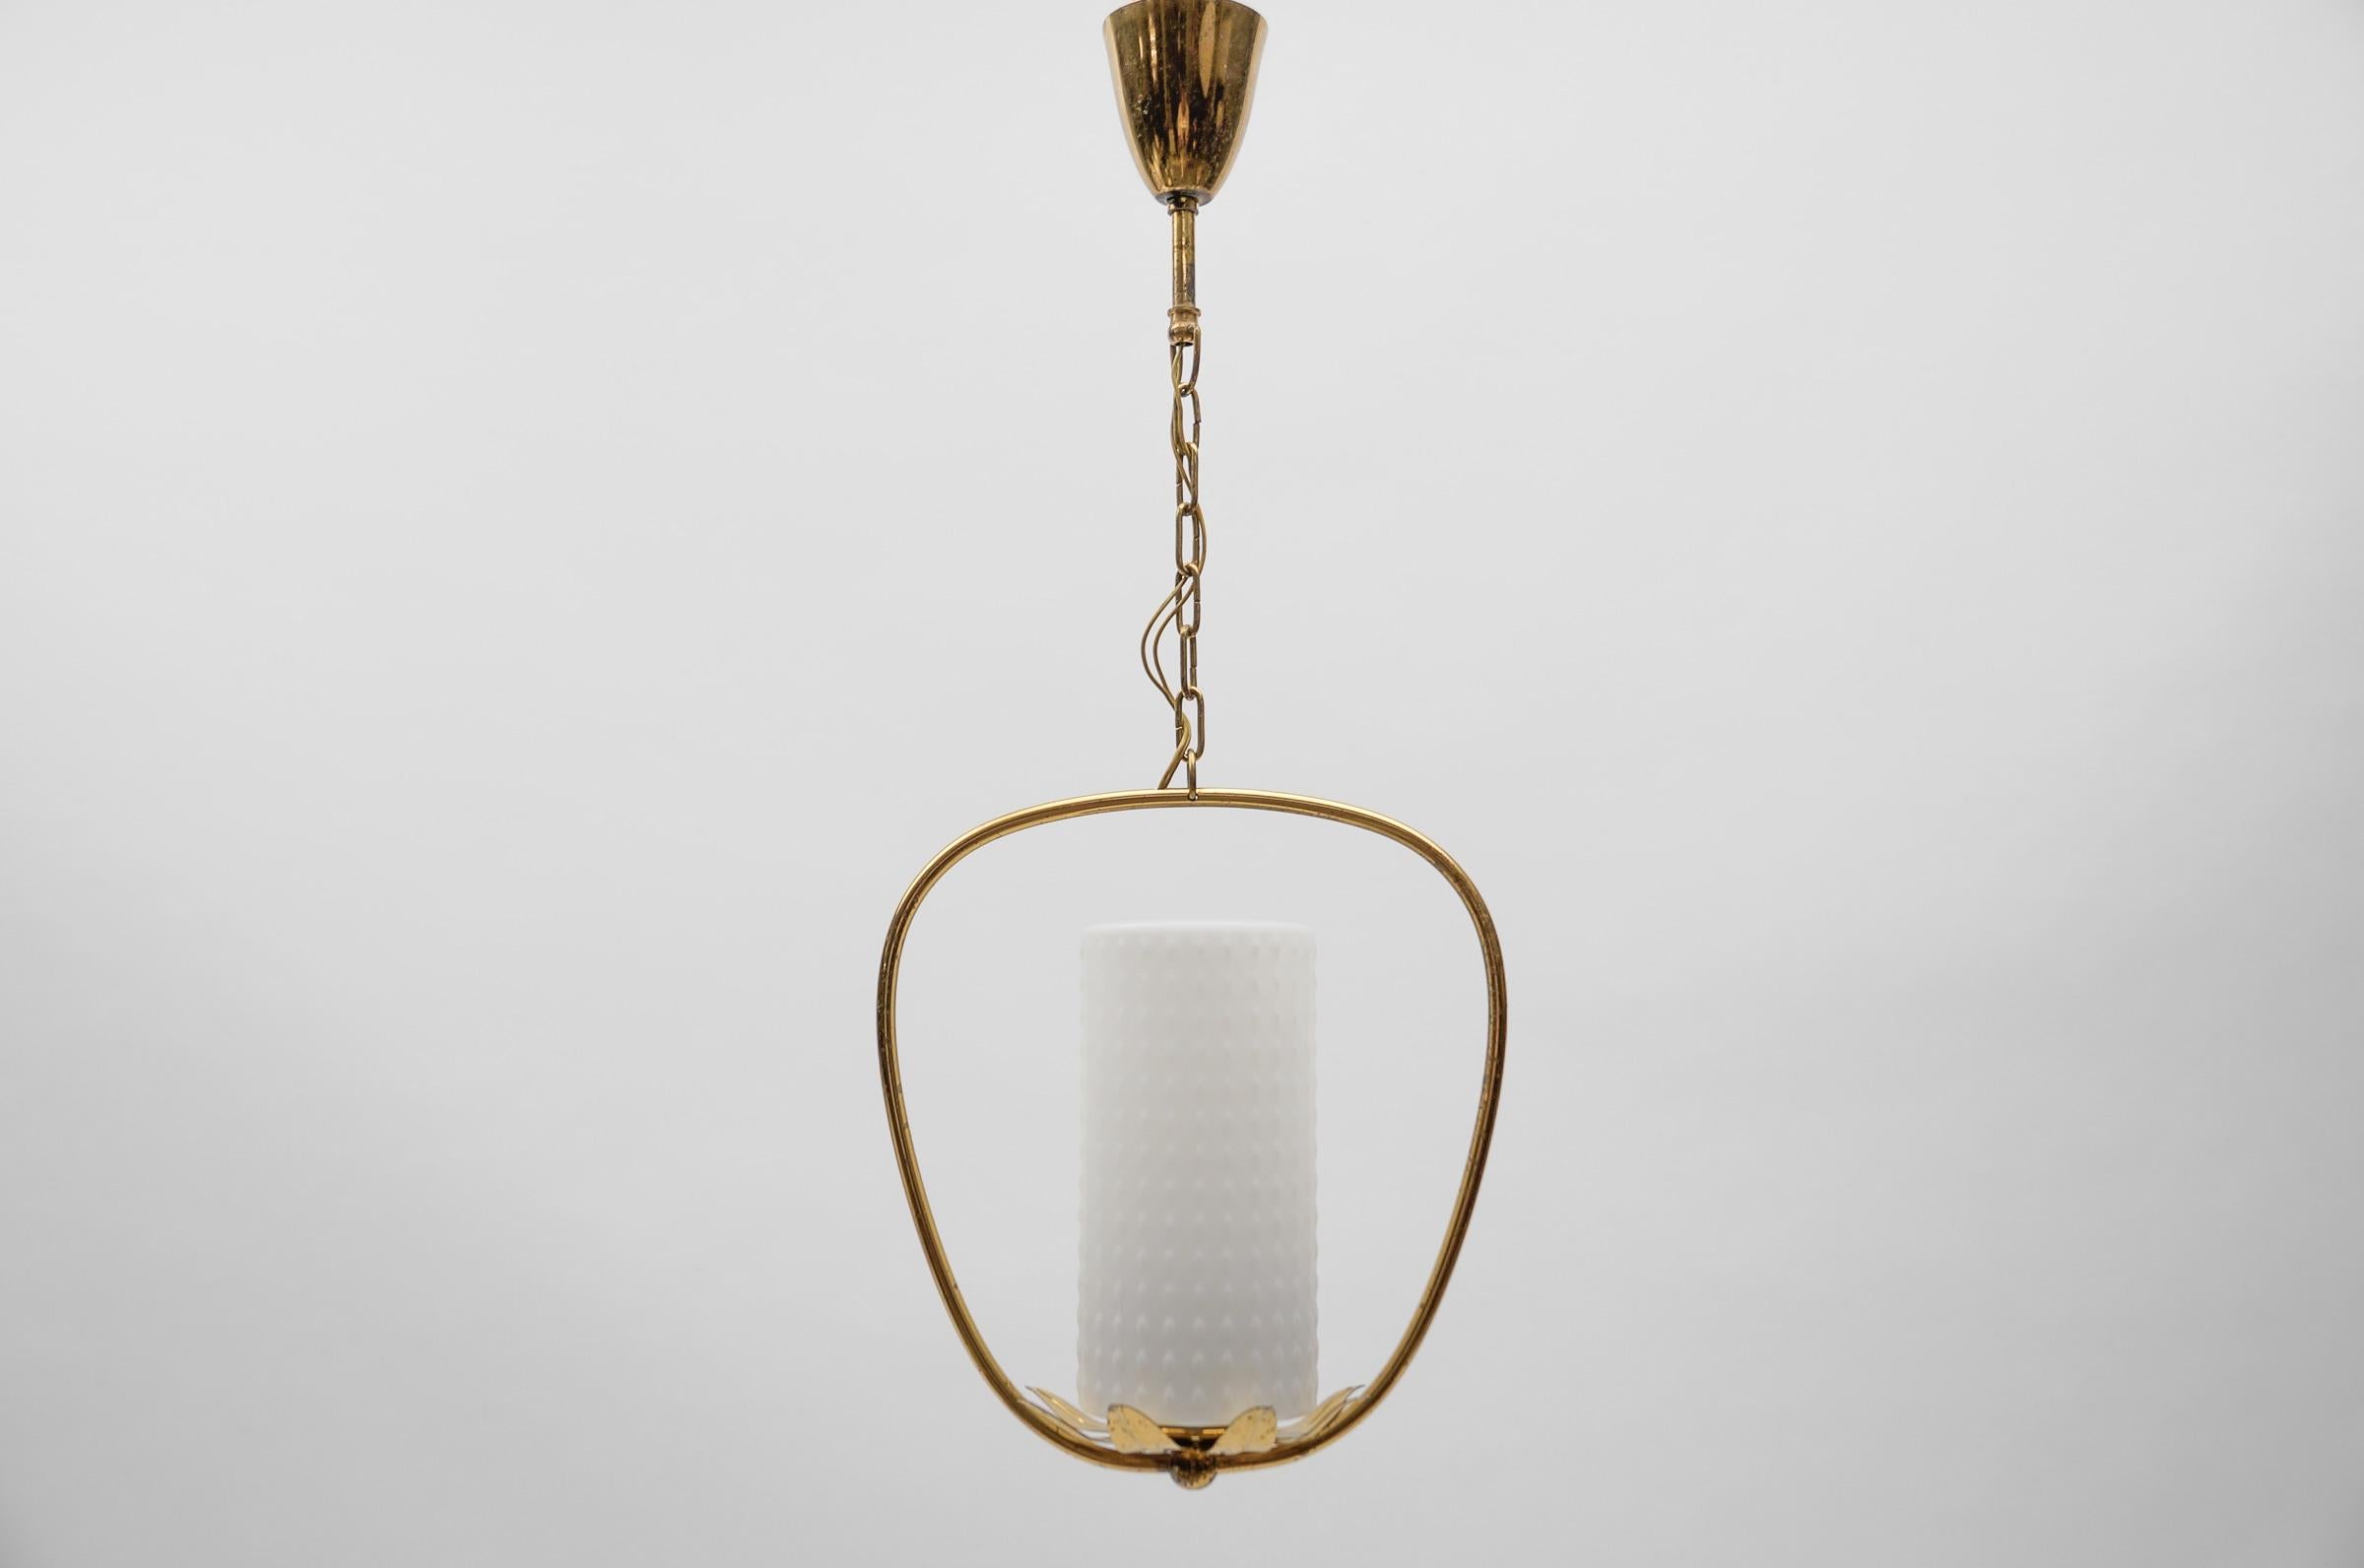 Lovely Mid Century Modern Brass & Bubble Glass Pendant Lamp by Rupert Nikoll, 1960s Austria / Wien

Dimensions
Width: 9.44 in. (24 cm)
Height: 22.04 in. (56 cm)
Depth: 5.51 in. (14 cm)

One E27 socket. Works with 220V and 110V.

Our lamps are